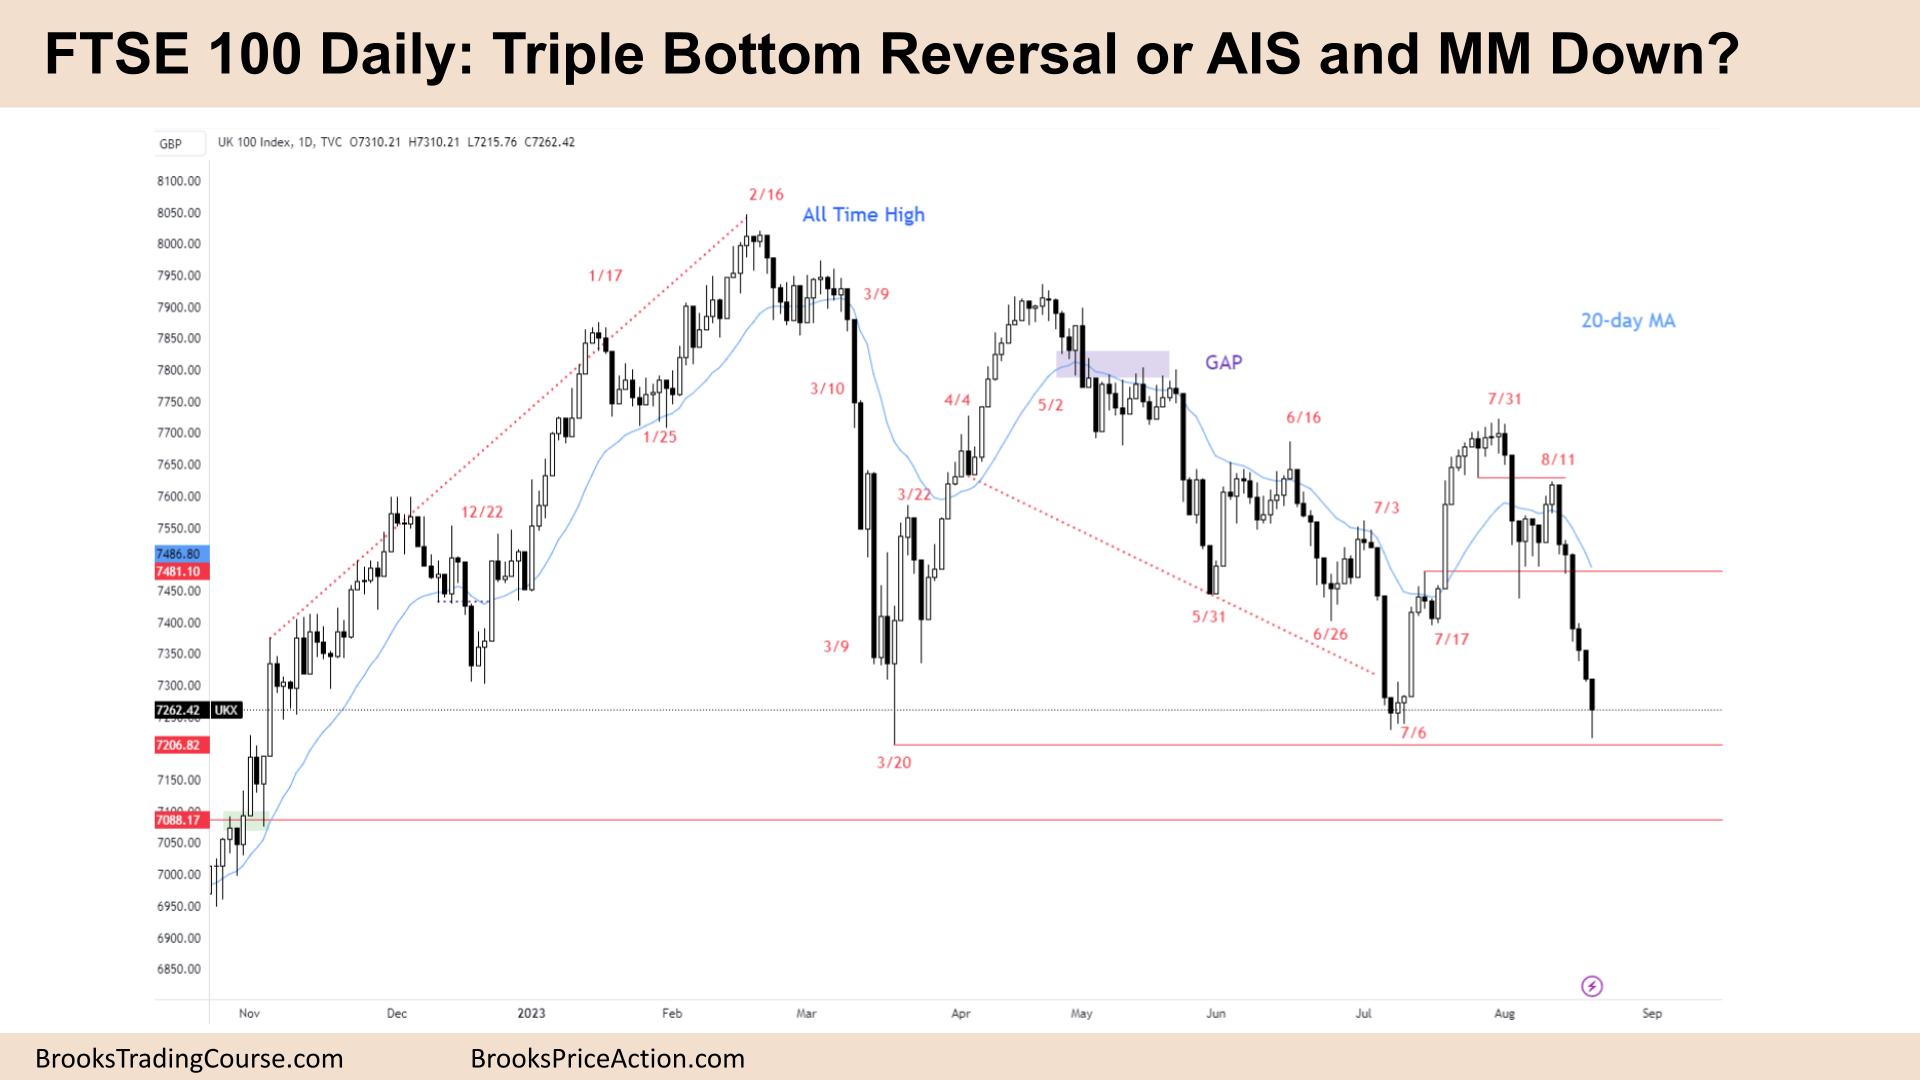 FTSE 100 Triple Bottom Reversal or AIS and MM Down